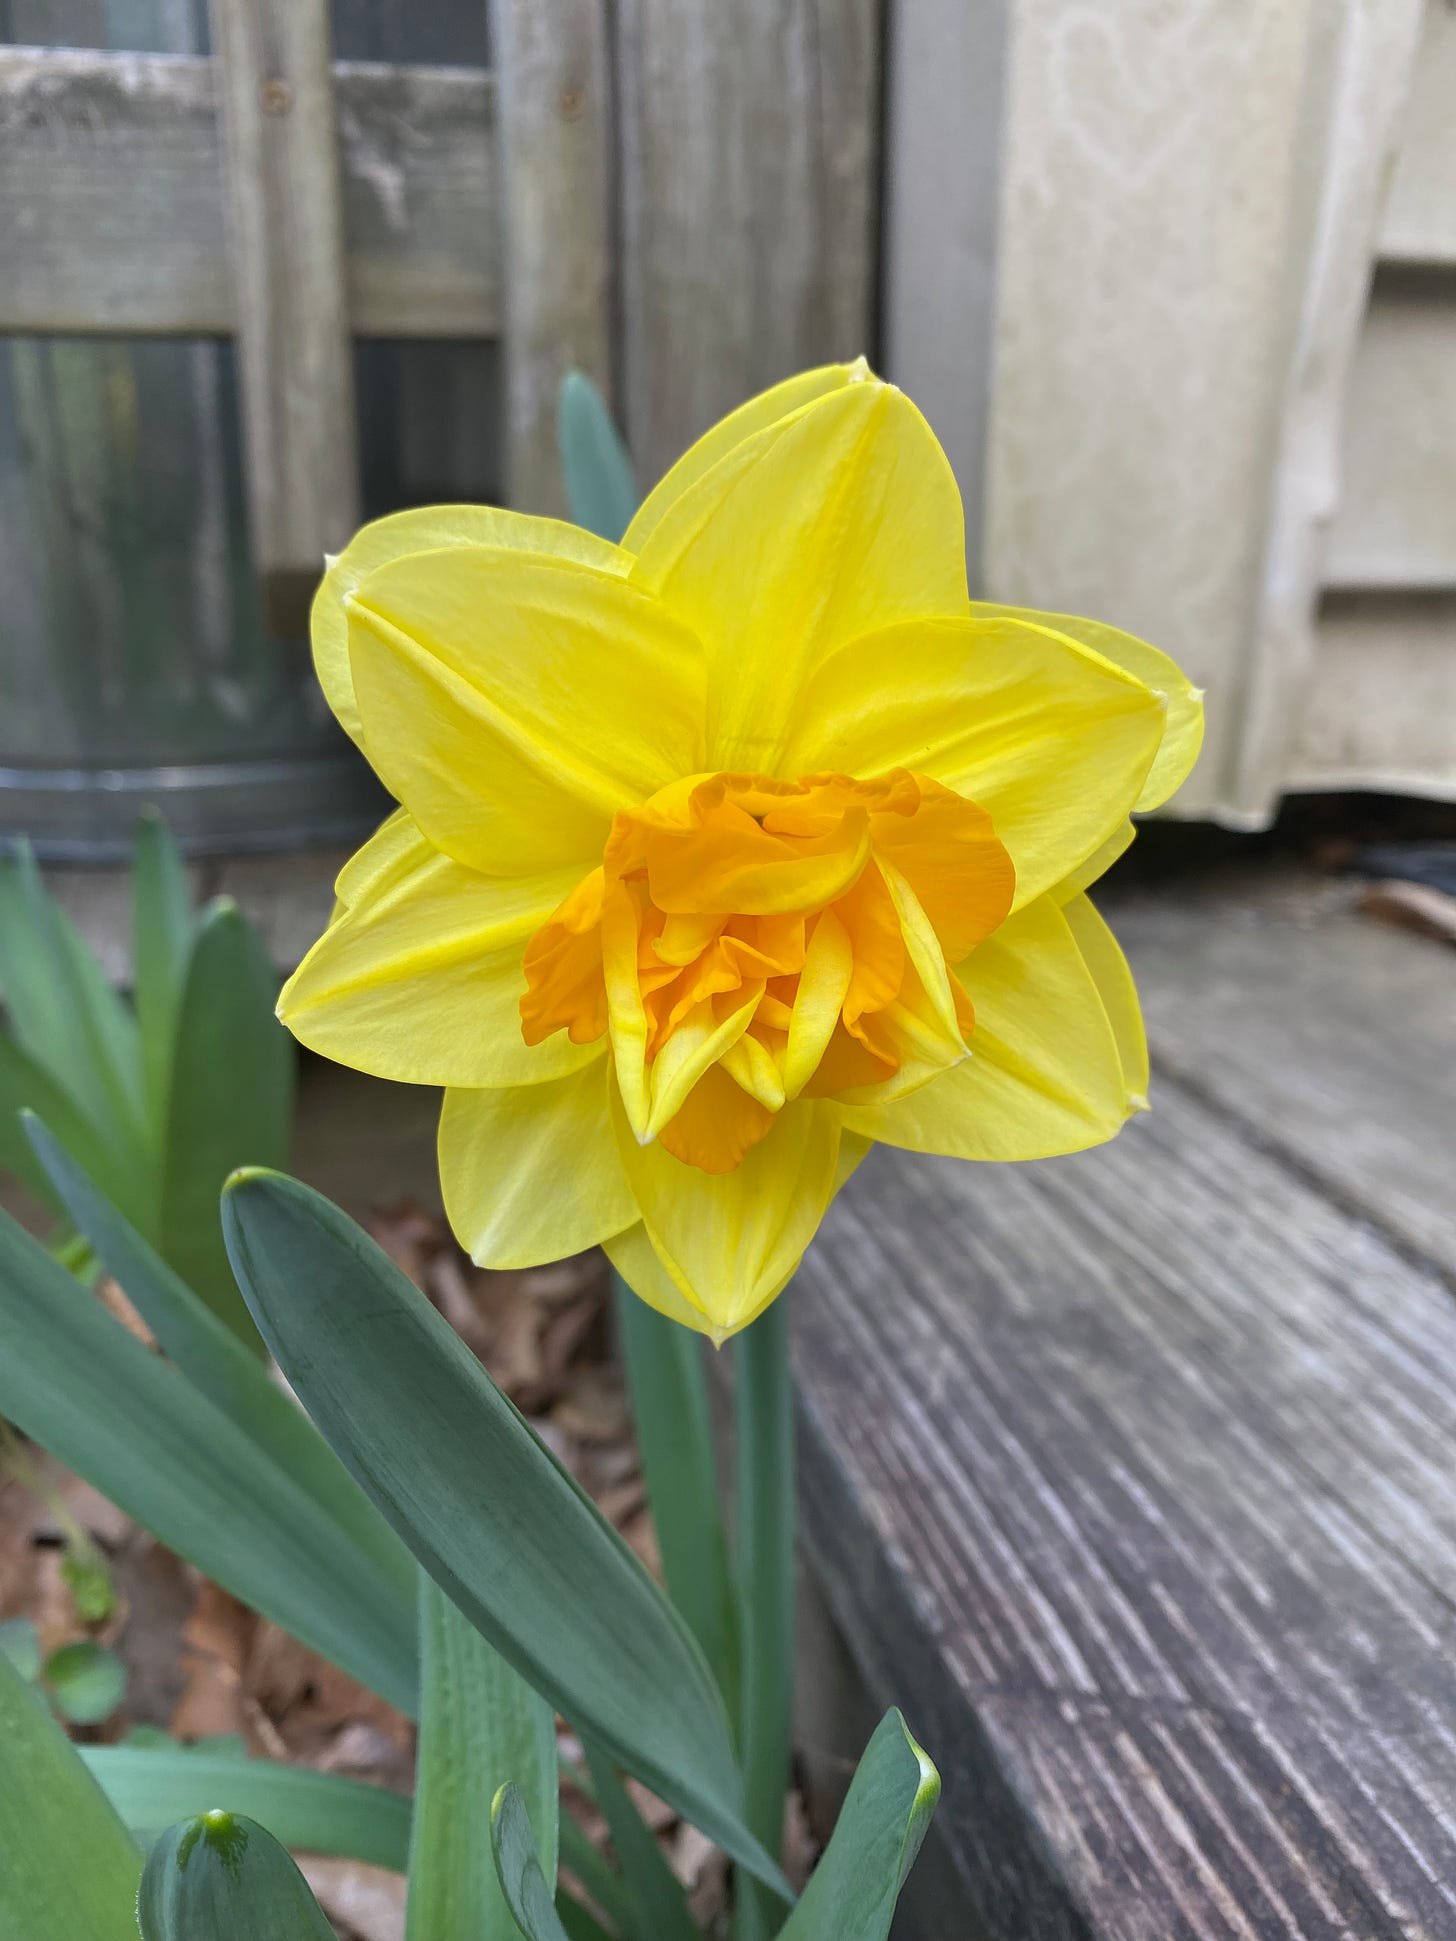 A bright yellow daffodil with an orange center.